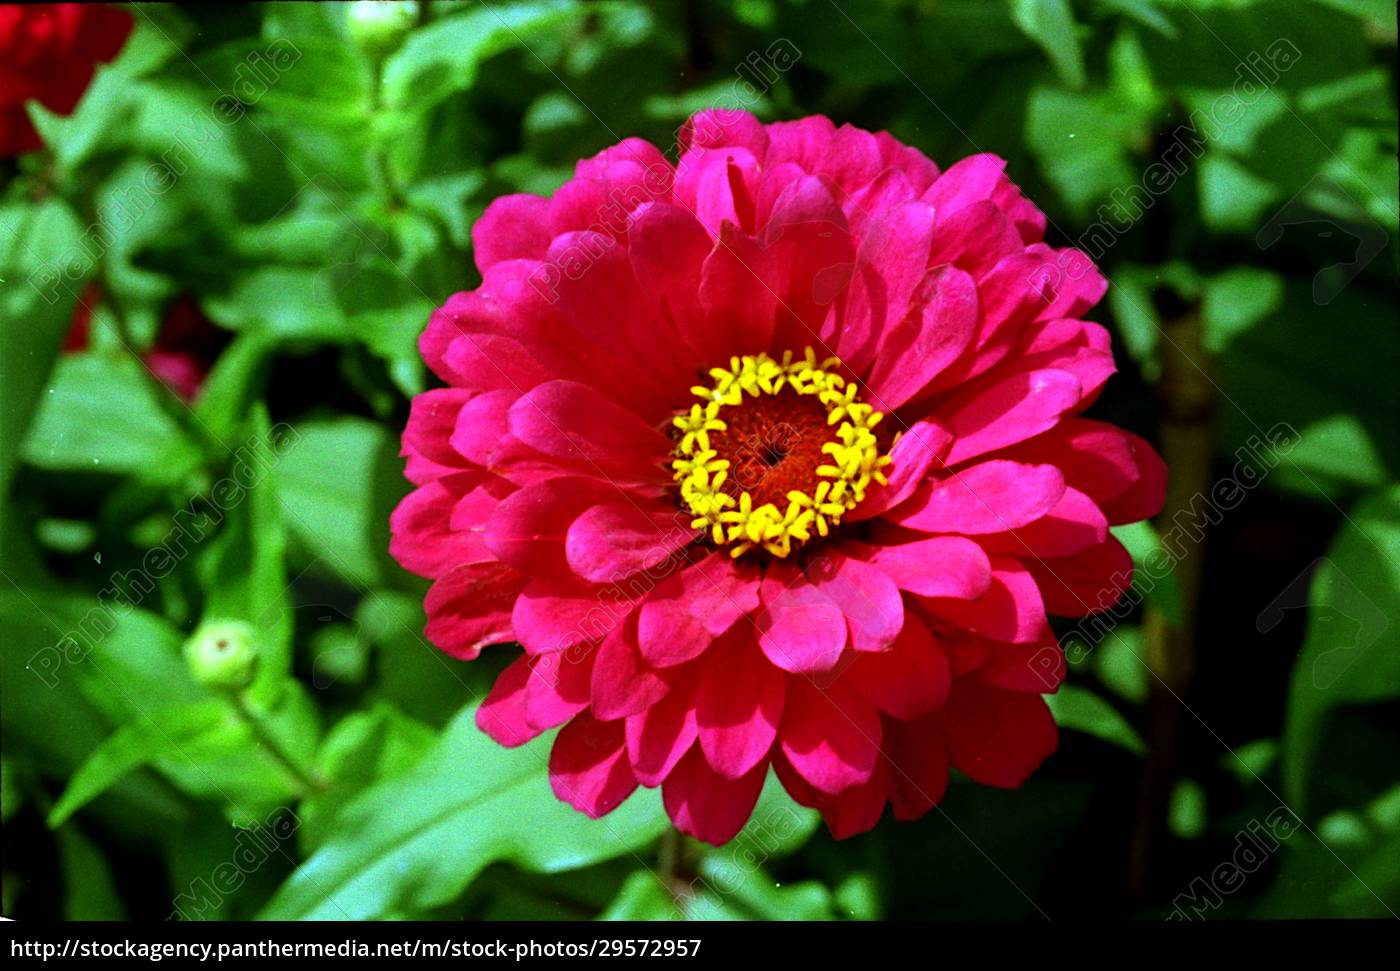 Bright Red Common Zinnia Flower Stock Photo Panthermedia Stock Agency